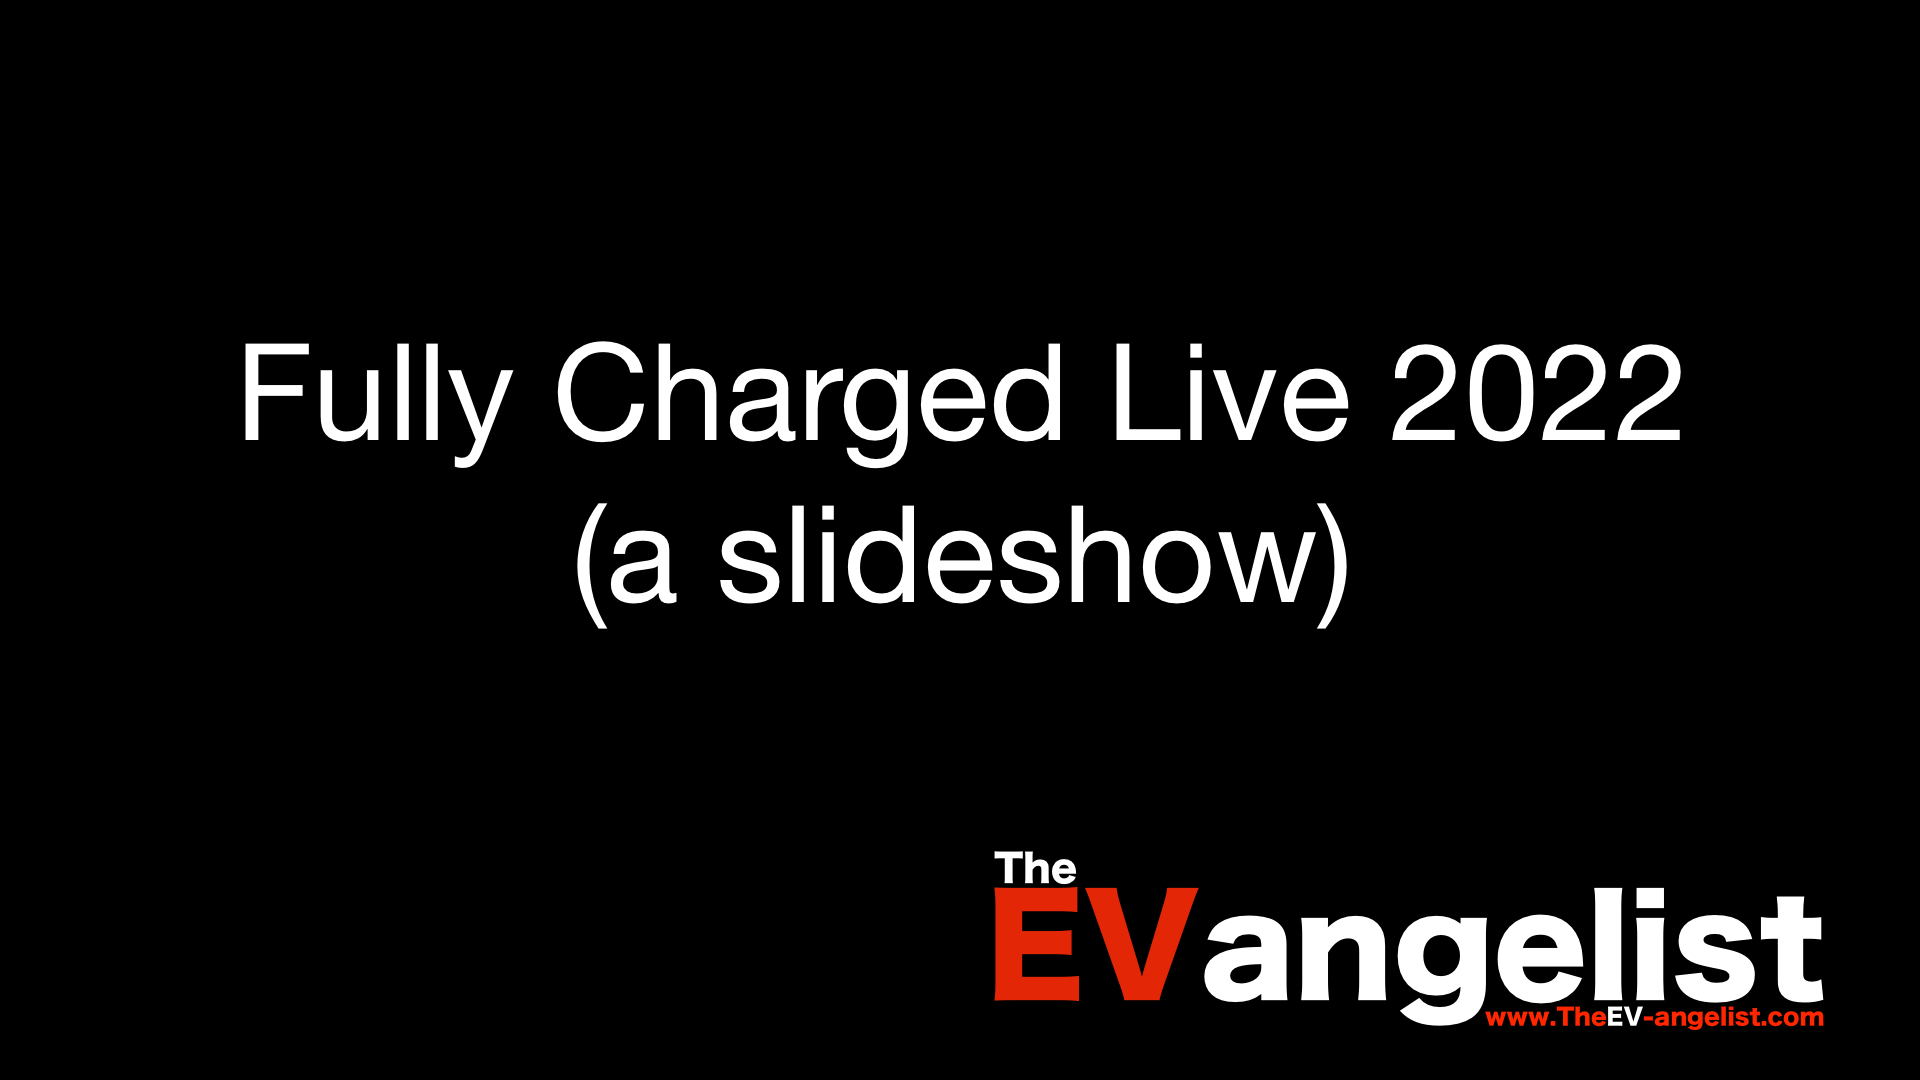 Fully Charged Live 2022 (a slideshow) The EVangelist